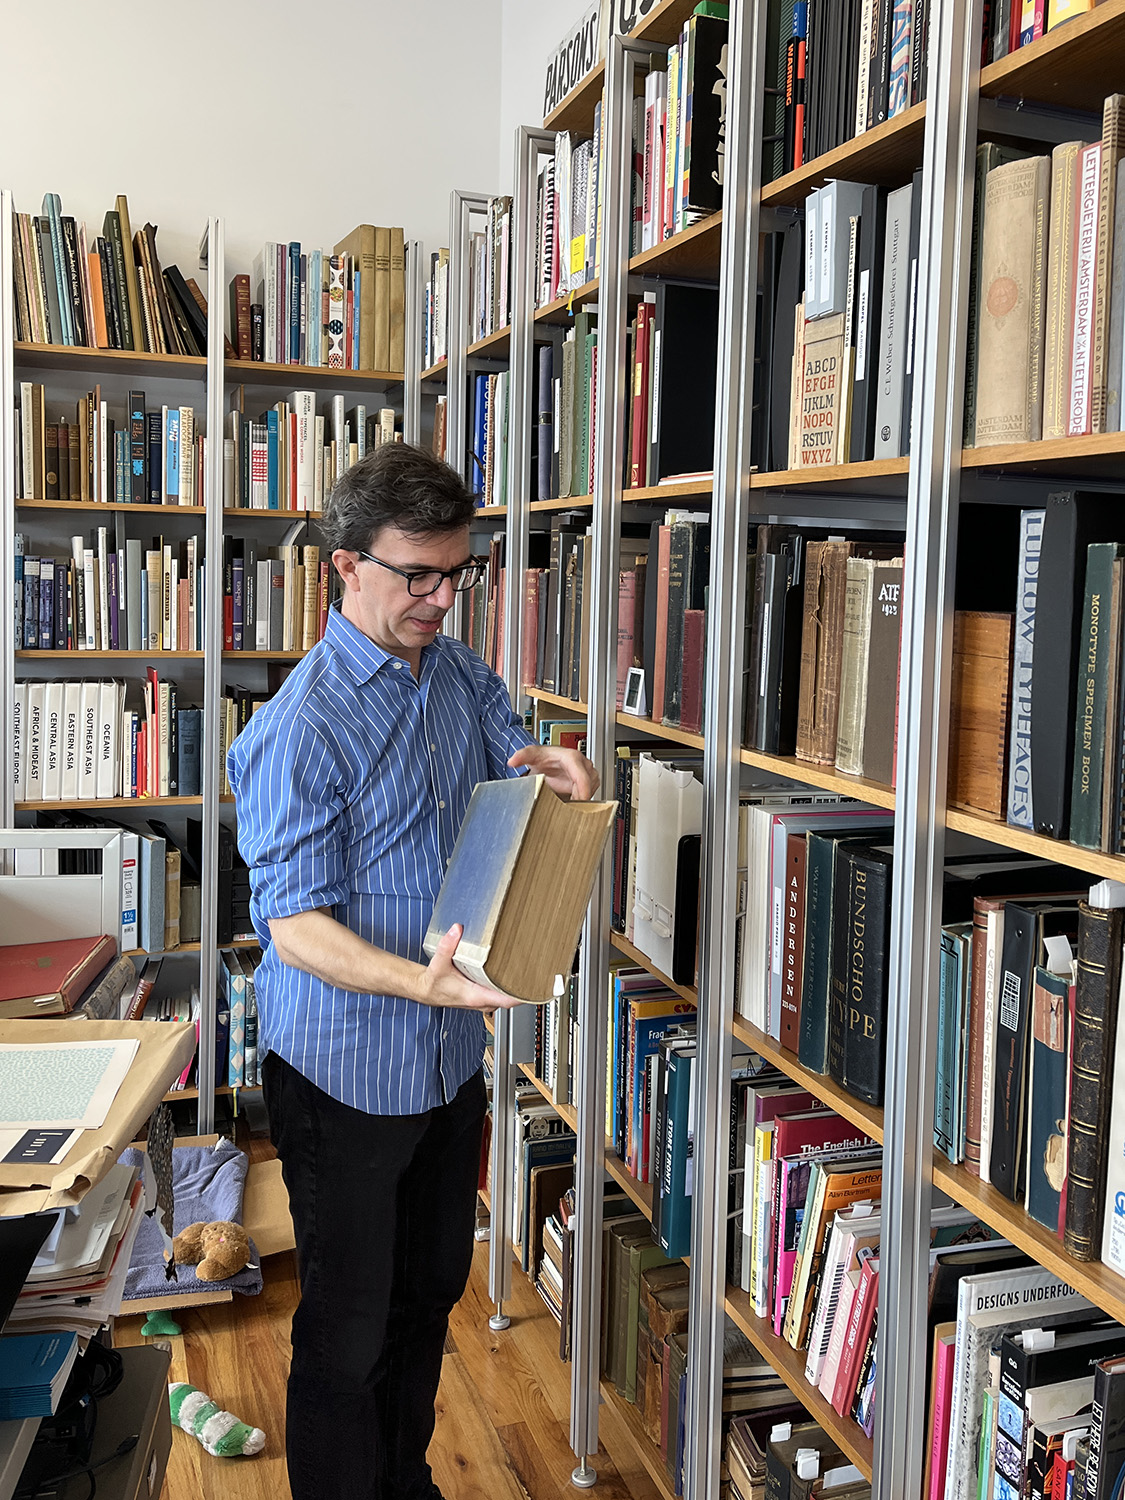 Tobias holding Stempel Foundry’s giant 1925 specimen book (my personal “white whale” which I hope to add to my library someday)